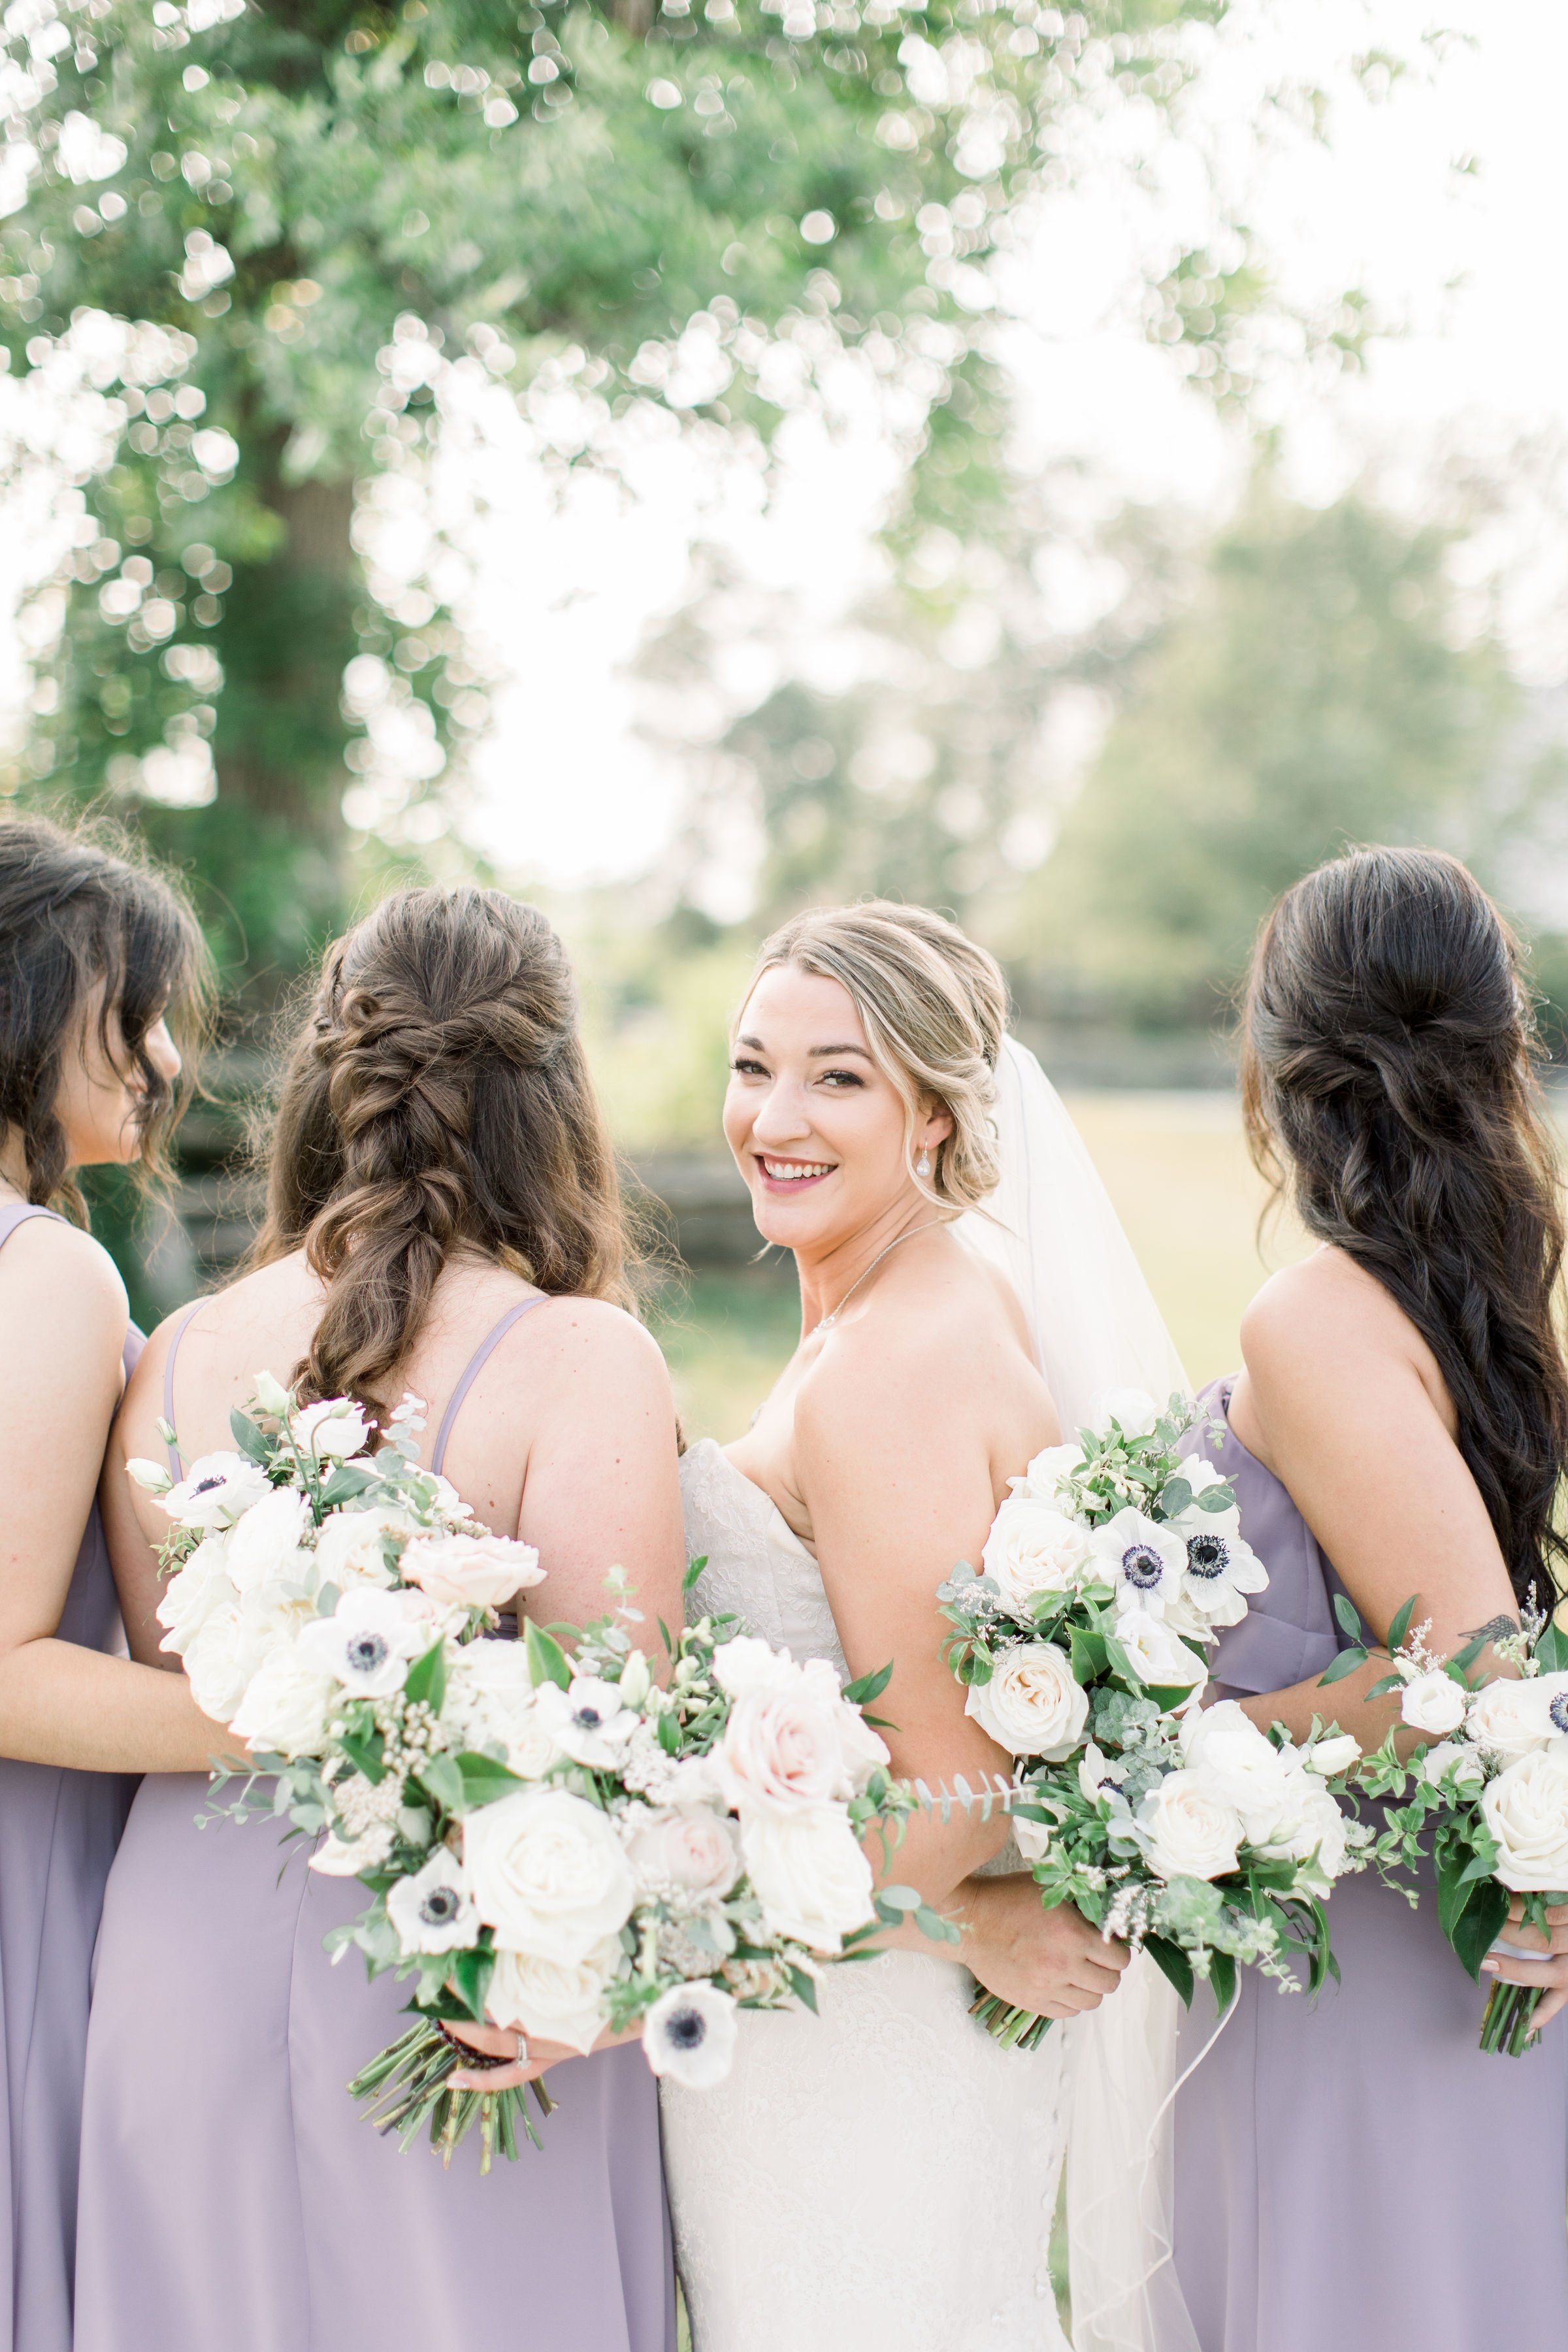  Chelsea Mason Photography captures a bride looking over her shoulder while hugging her bridesmaids. purple bridesmaids dresses #StonefieldEstates #Ontarioweddings #Chelseamasonphotography #Chelseamasonengagements #Ontarioweddingphotographers 